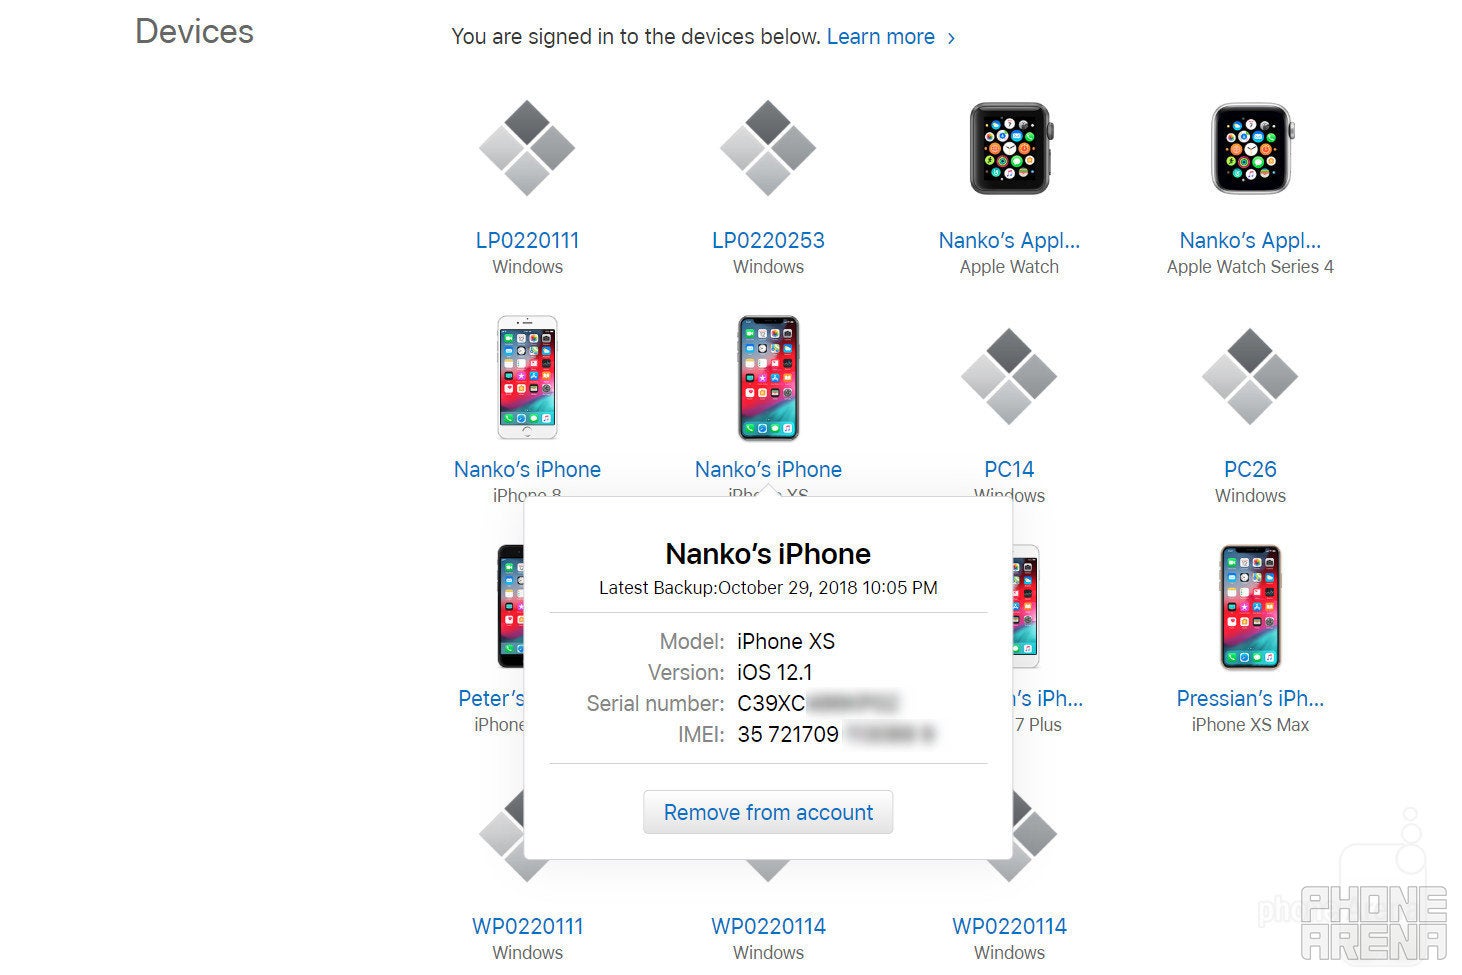 (Image credit - PhoneArena) Using iCloud to find a phone's IMEI number - How to Find a Phone's IMEI Number: A Step-by-Step Guide